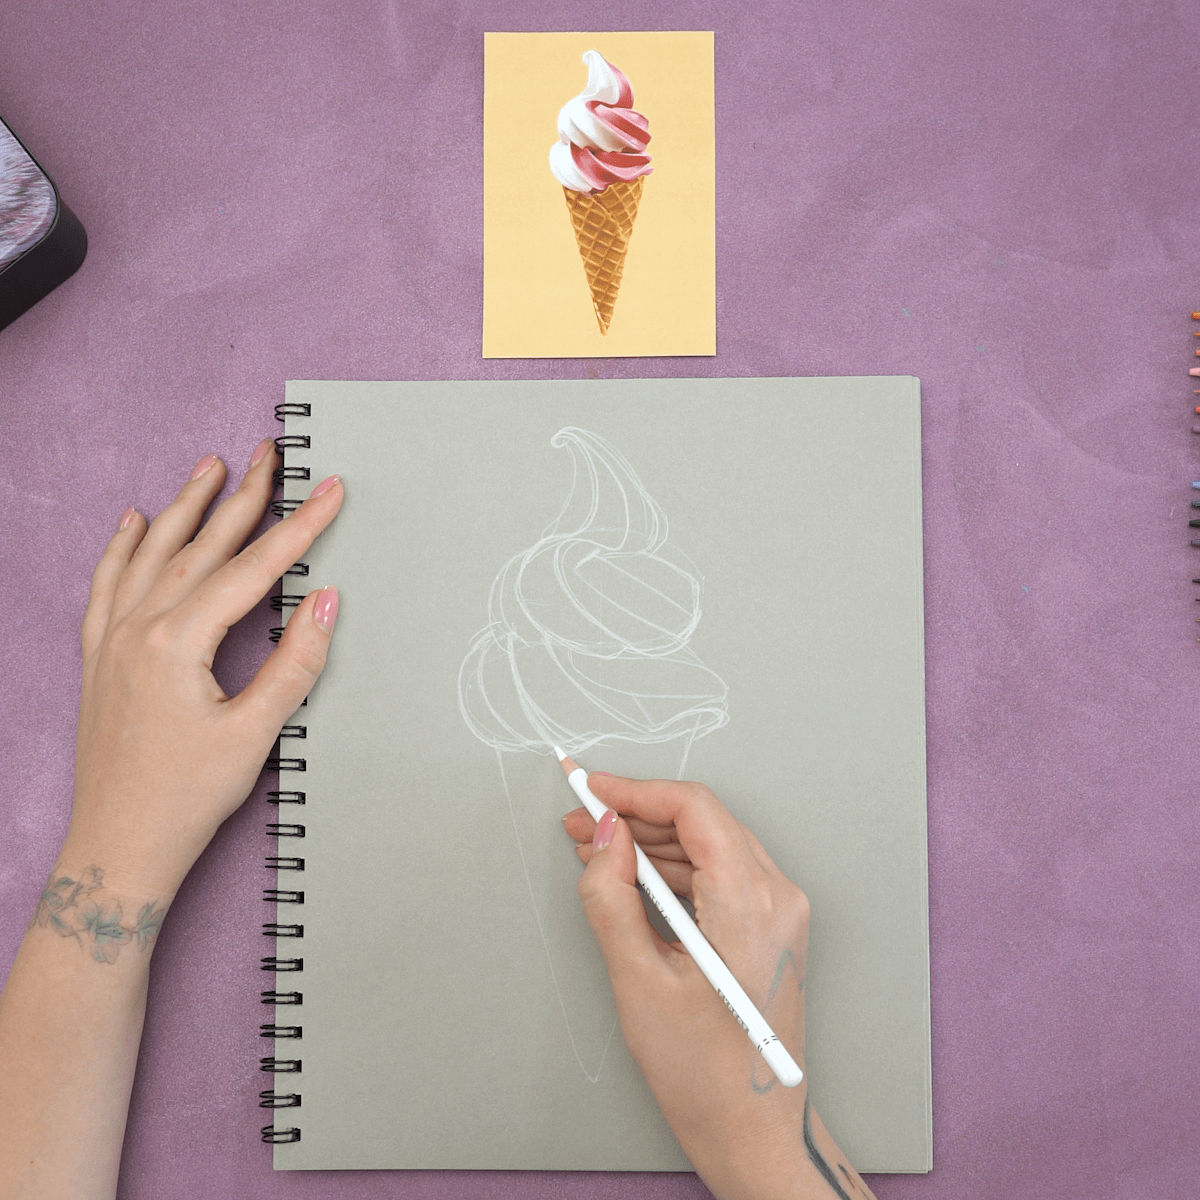 Amazon.com: Ice Cream Coloring Book for Adults: Premium Ice cream Coloring  Book With 40 Coloring Pages | Stress Relieving Creative Fun Drawing for Man  and Woman.: 9798553243807: Ninja, Coloring: Books